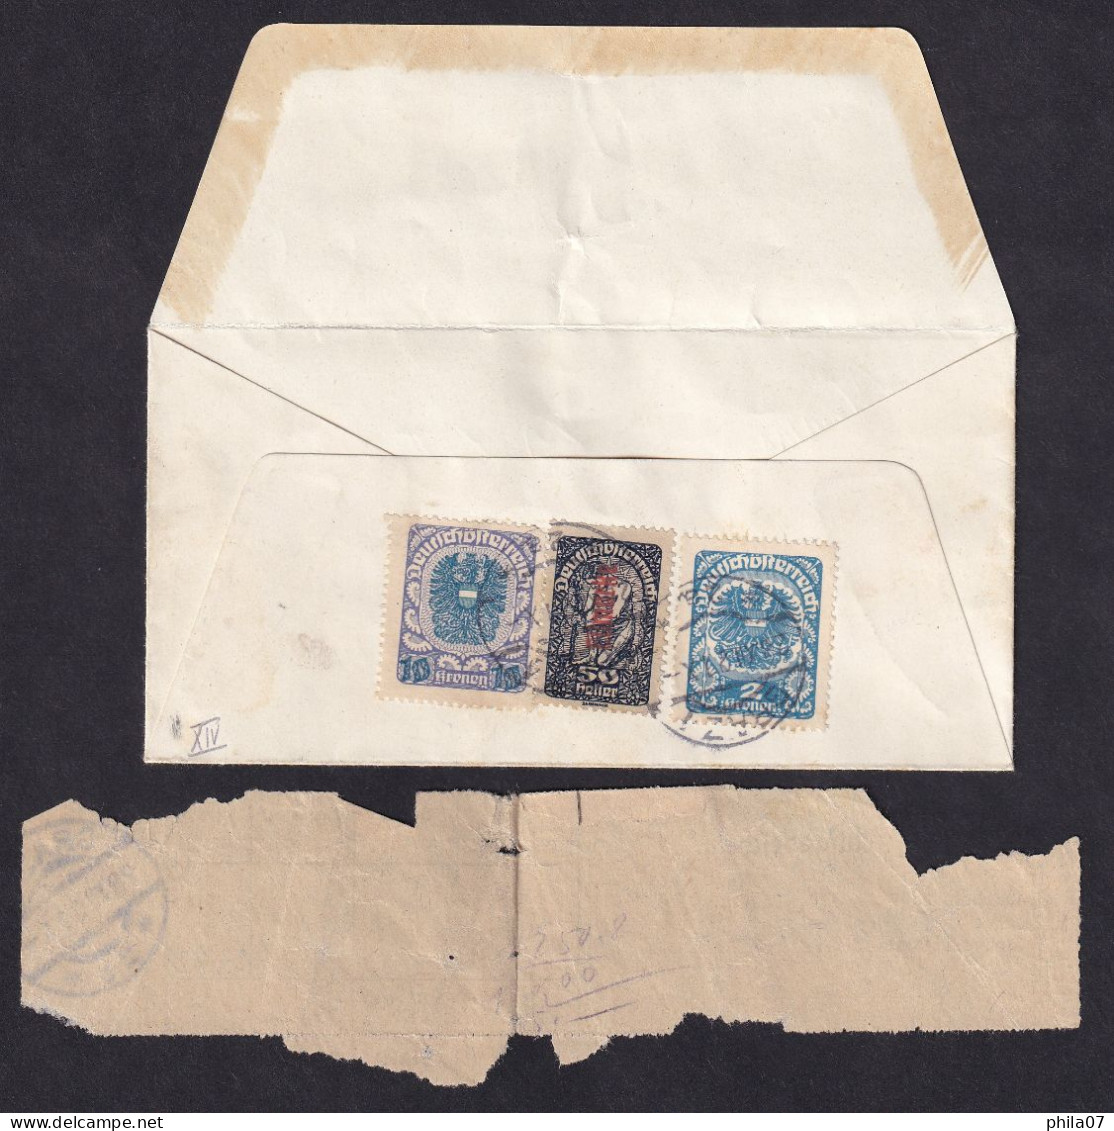 AUSTRIA - Letter Sent By Registered Mail Loco Graz 28.12.1921. Franking On The Back Of Letter With Three Stamps / 3 Scan - Lettres & Documents